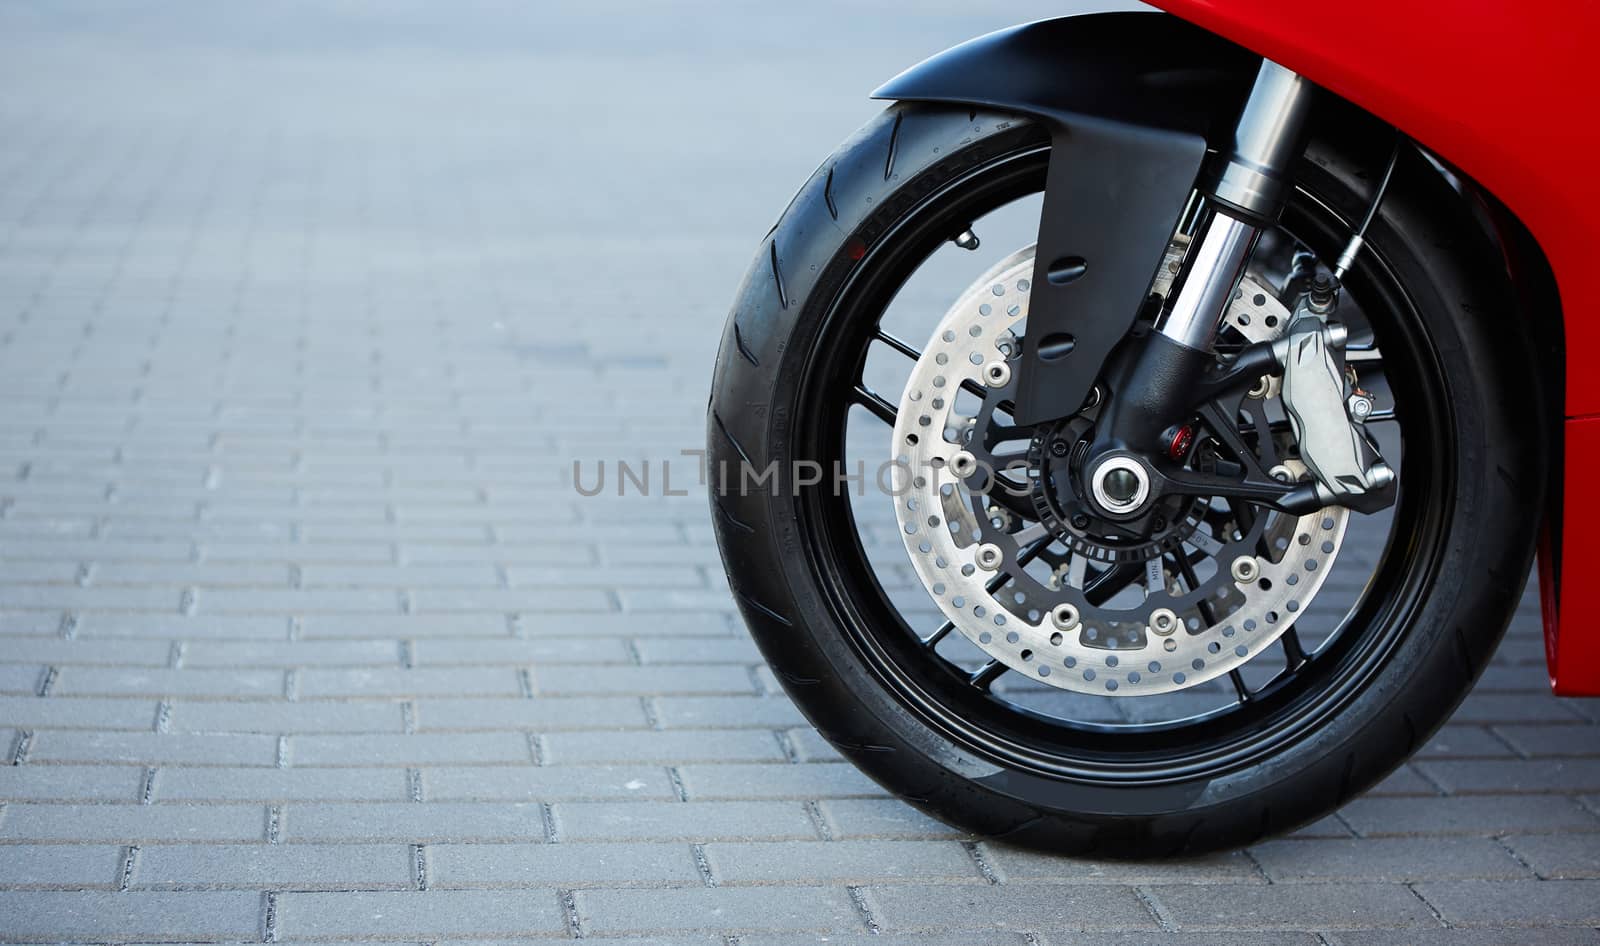 The Front motorcycle disk breaks and tire in close up